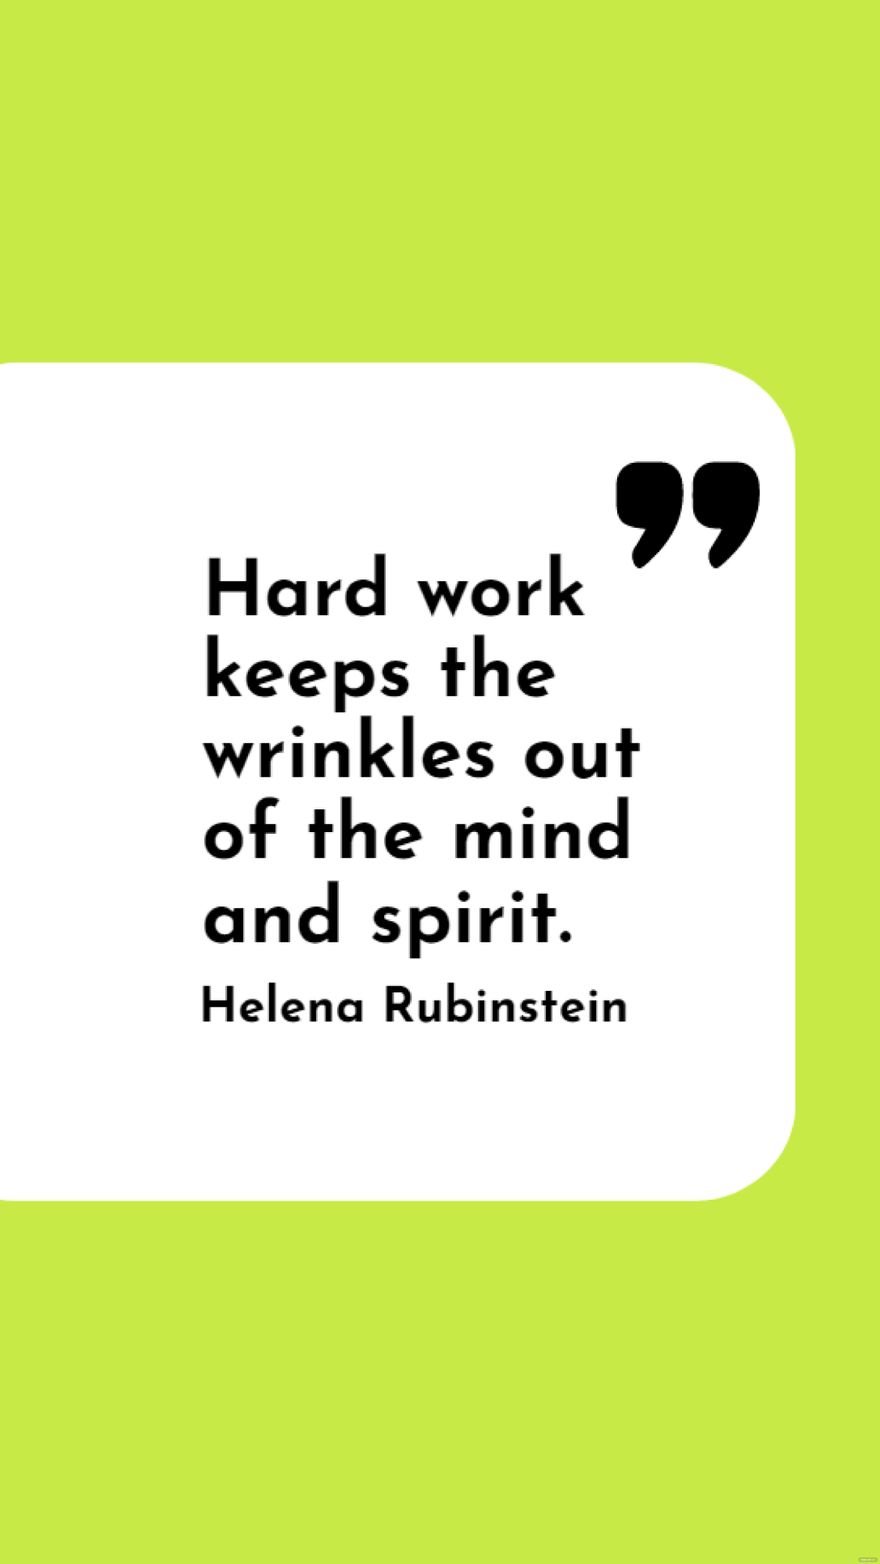 Helena Rubinstein - Hard work keeps the wrinkles out of the mind and spirit.